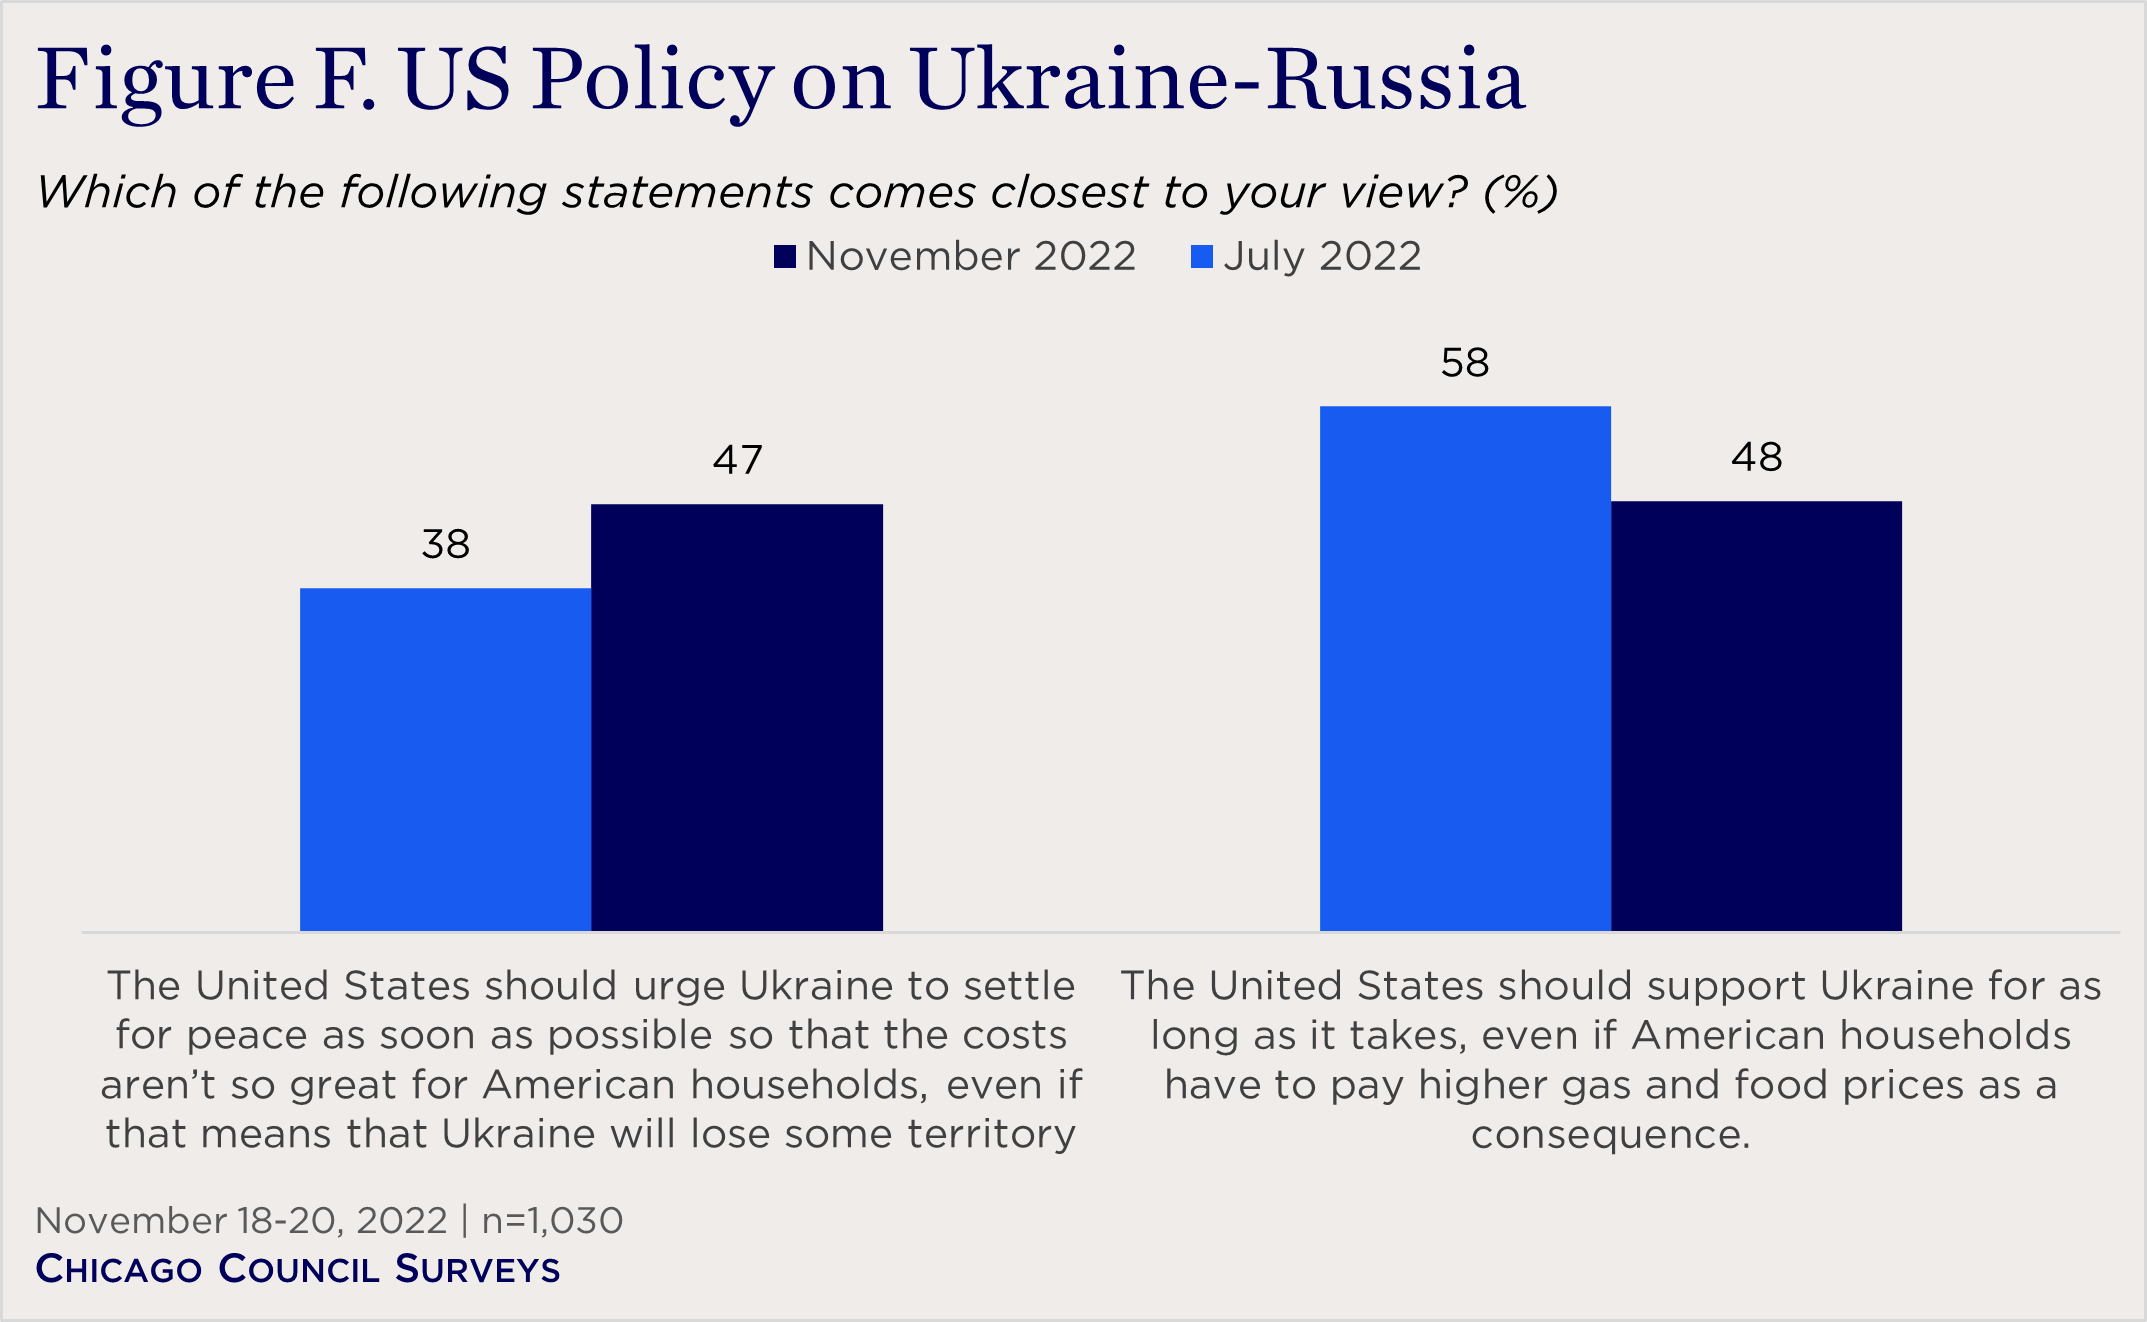 "bar chart showing views on US policy on Ukraine in November and July"